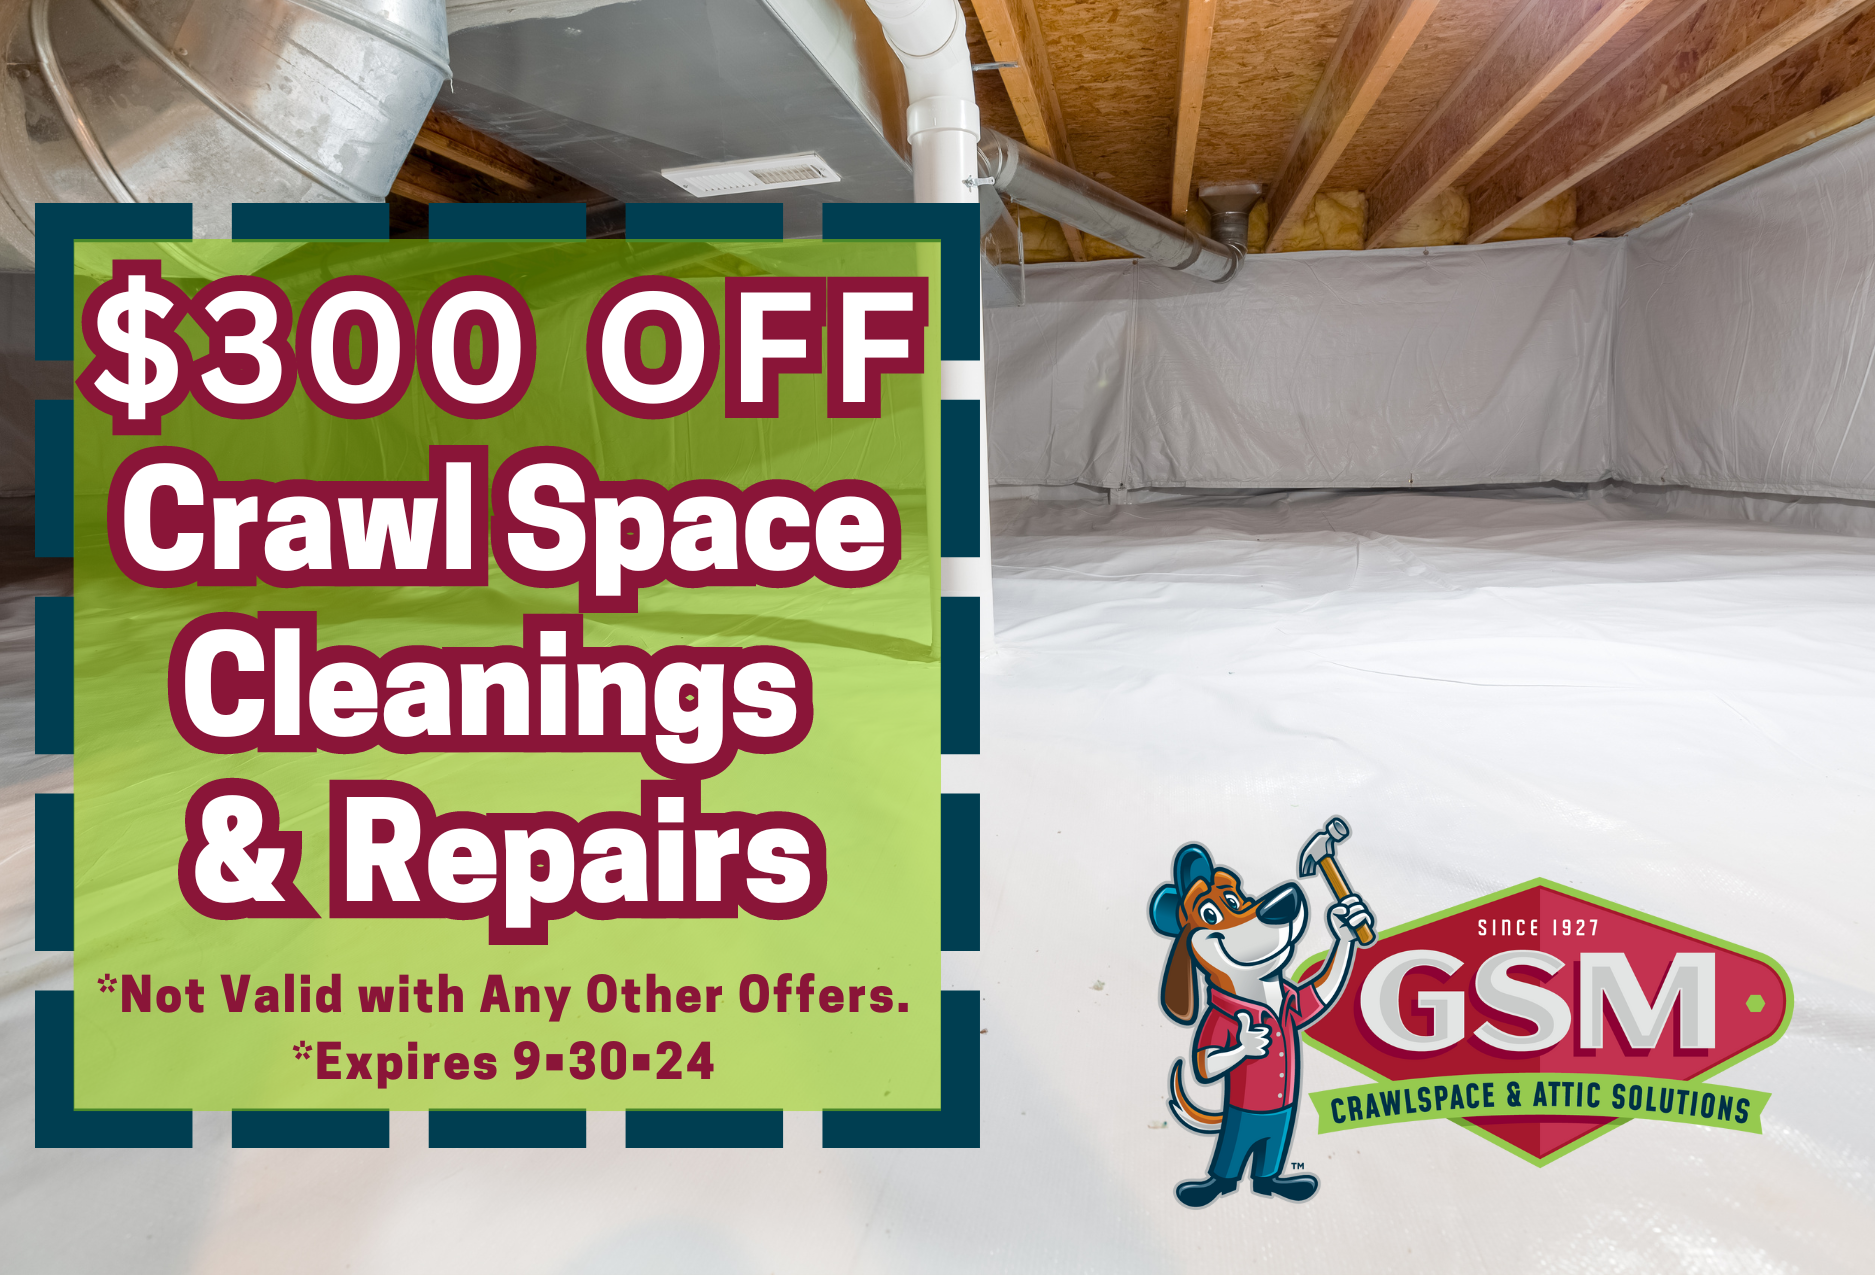 Crawl Space Cleaning Services Charlotte & Gastonia